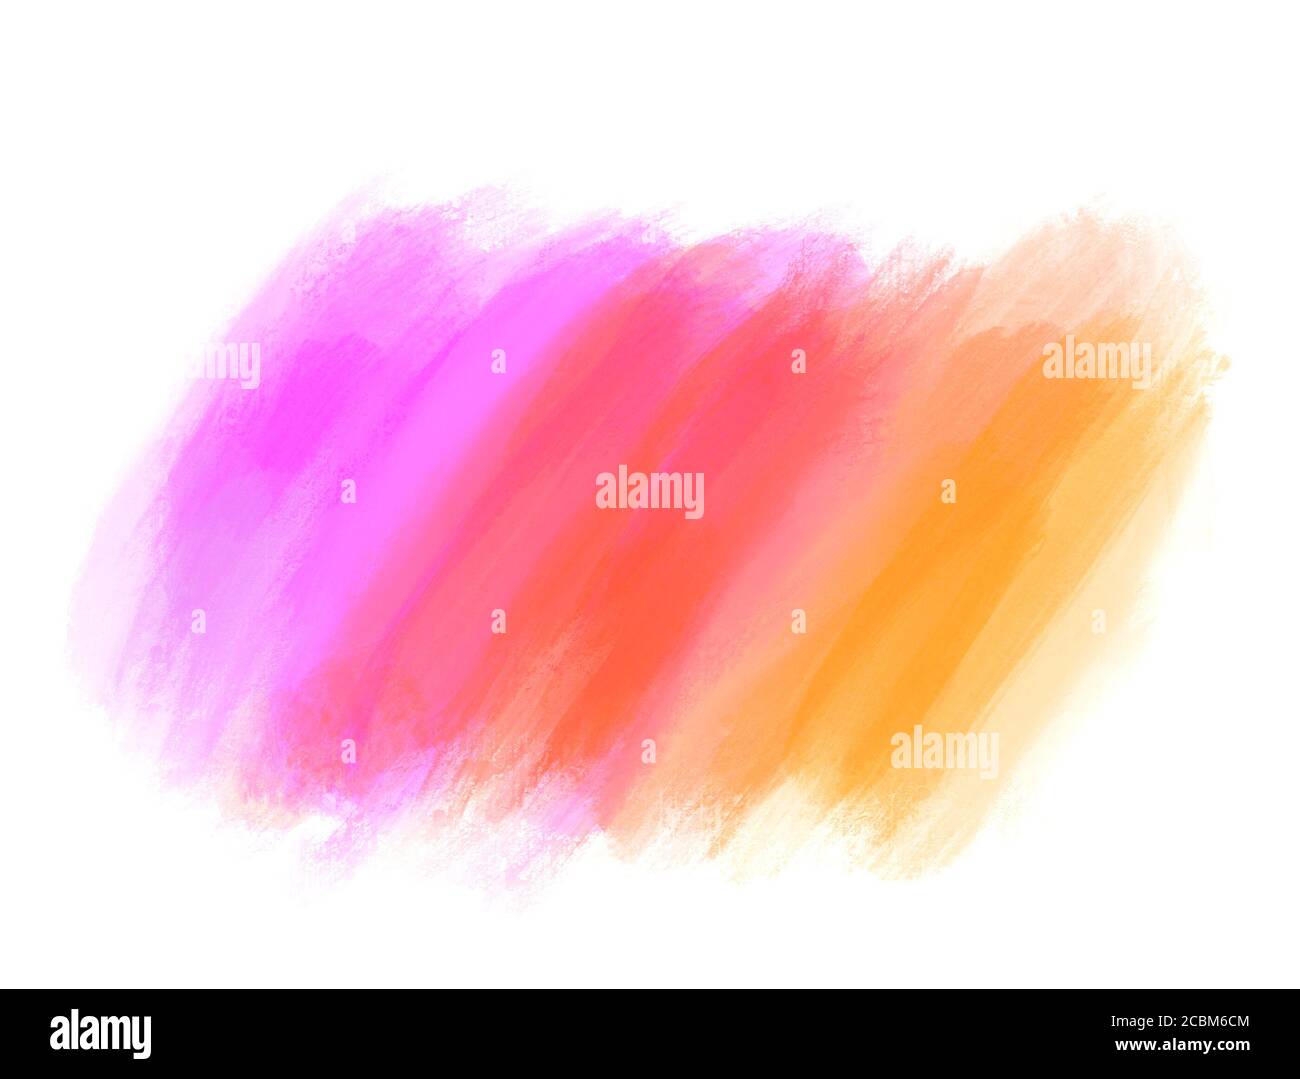 illustration of four Watercolor elements background. Stock Photo